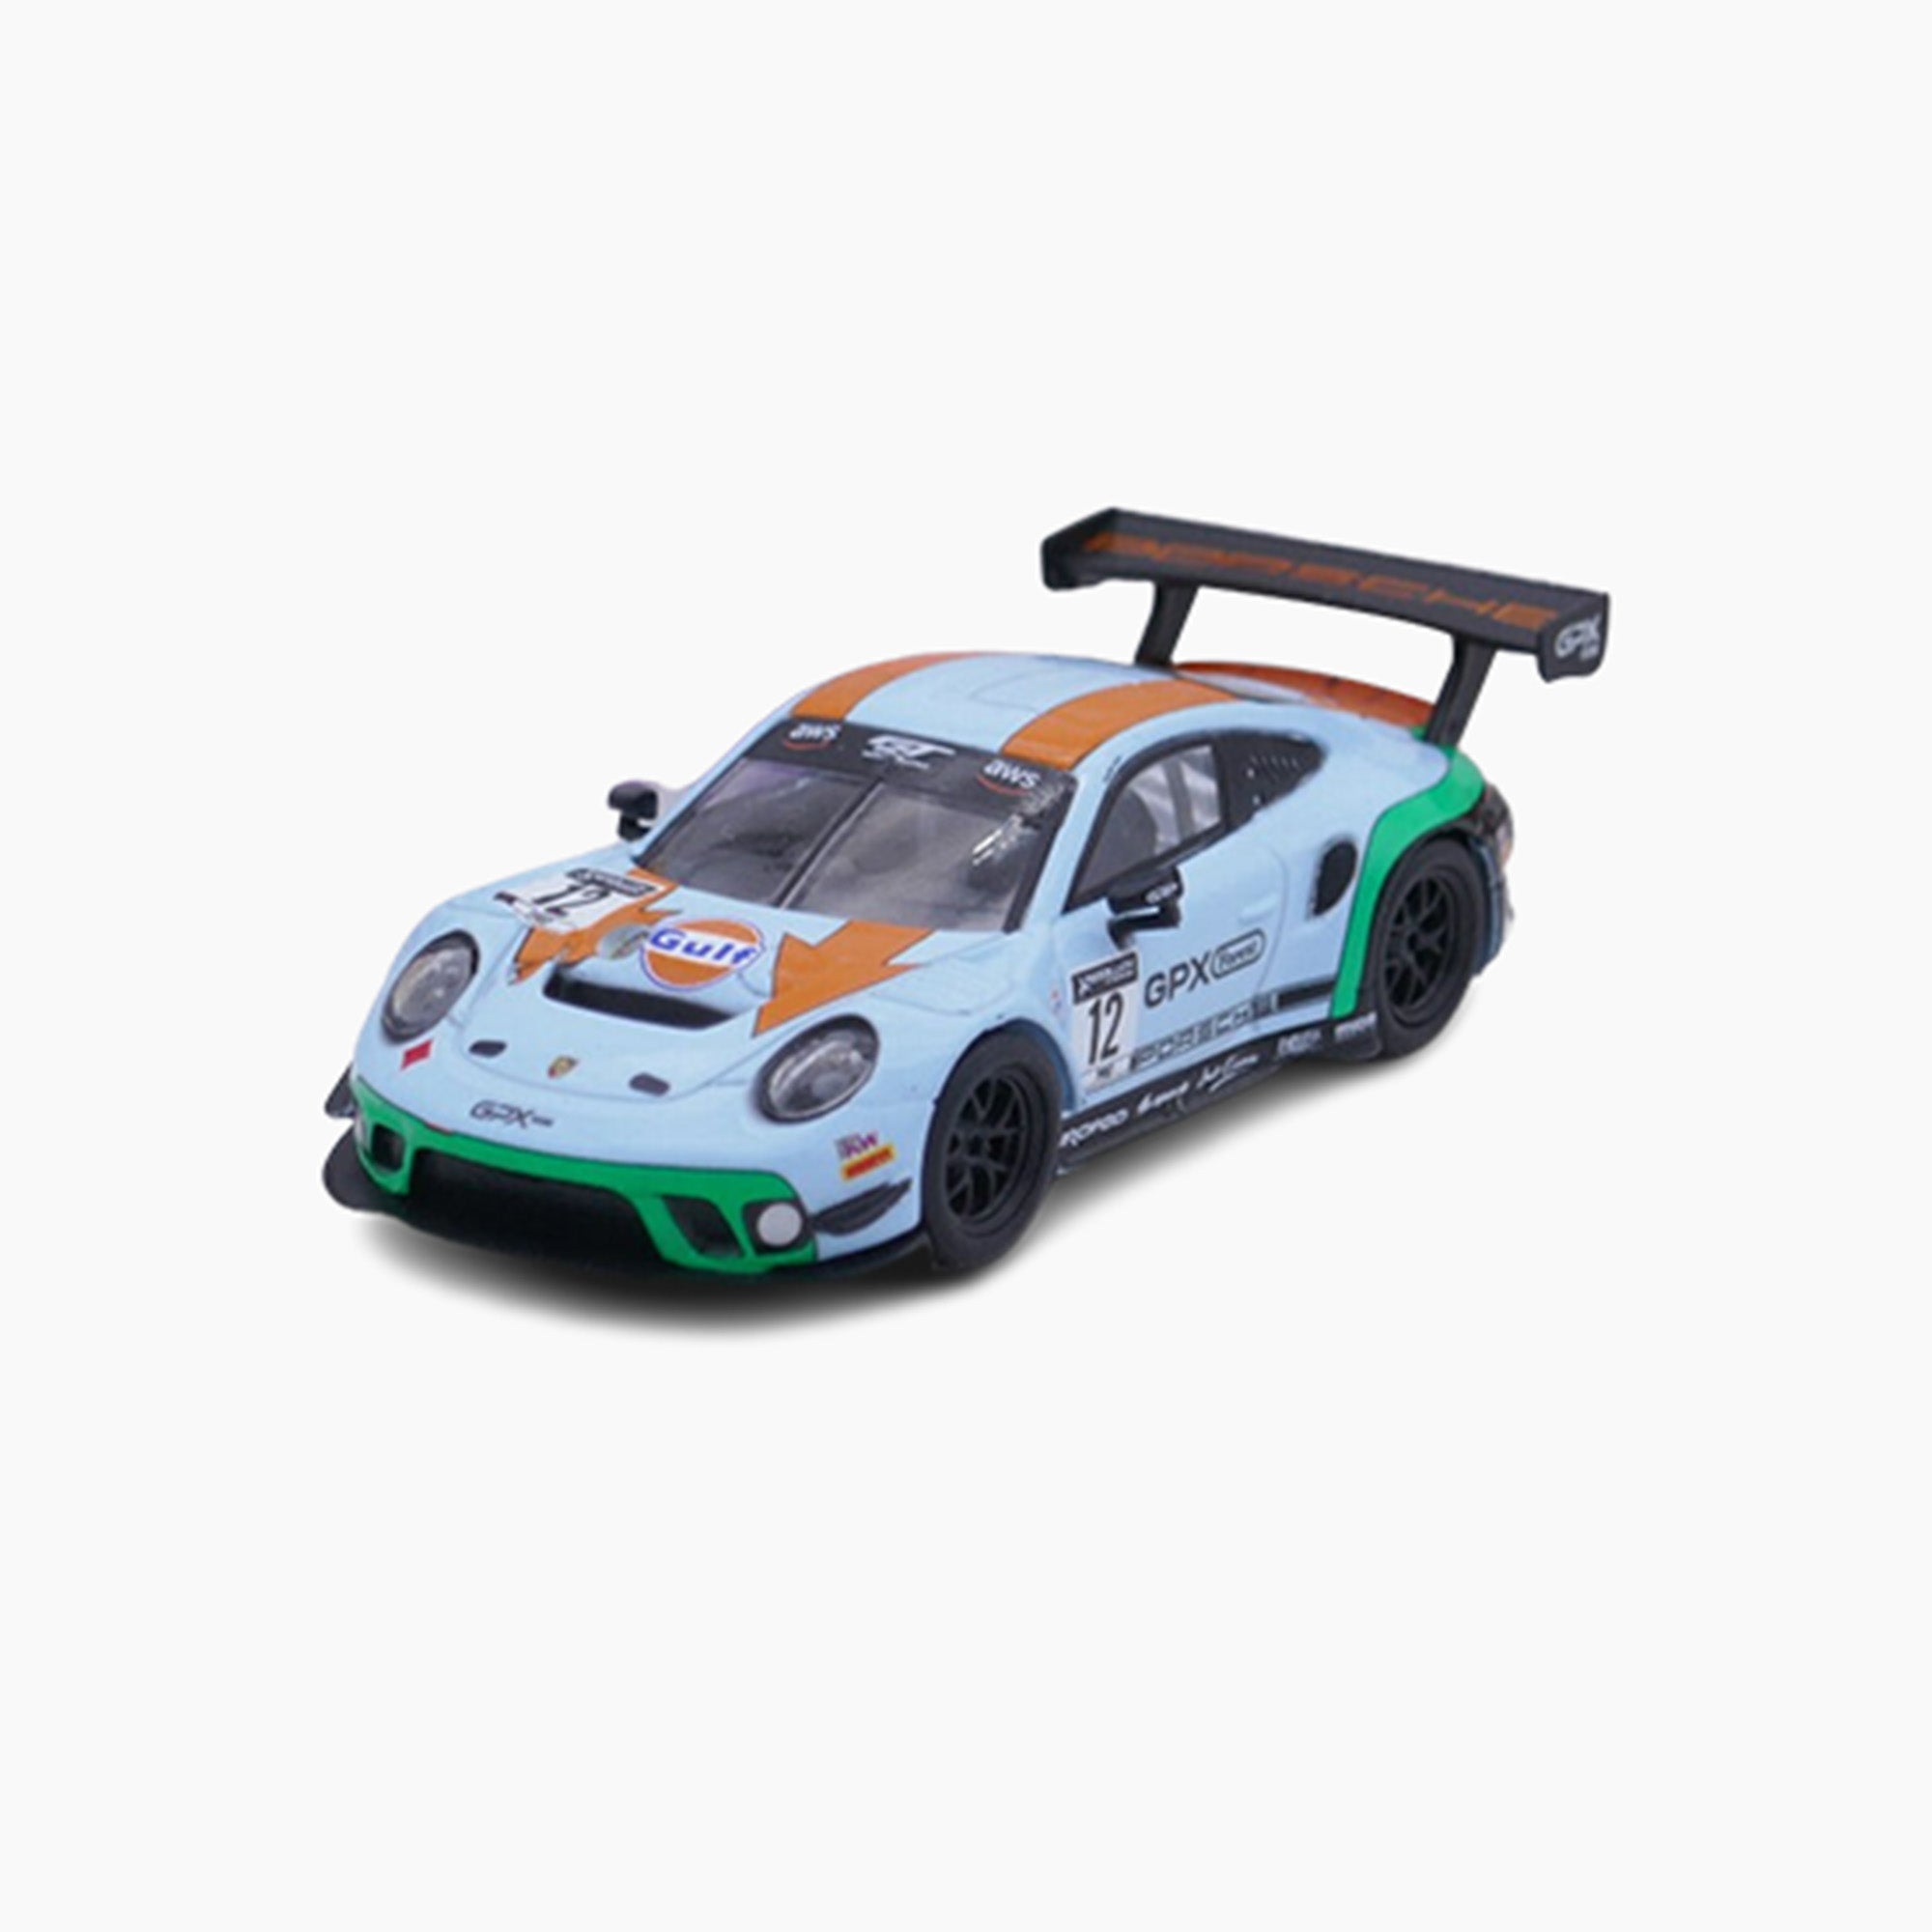 Porsche GT3 R GPX Racing No.12 "The Diamond" | 1:64 Scale Model-1:64 Scale Model-Spark Models-gpx-store